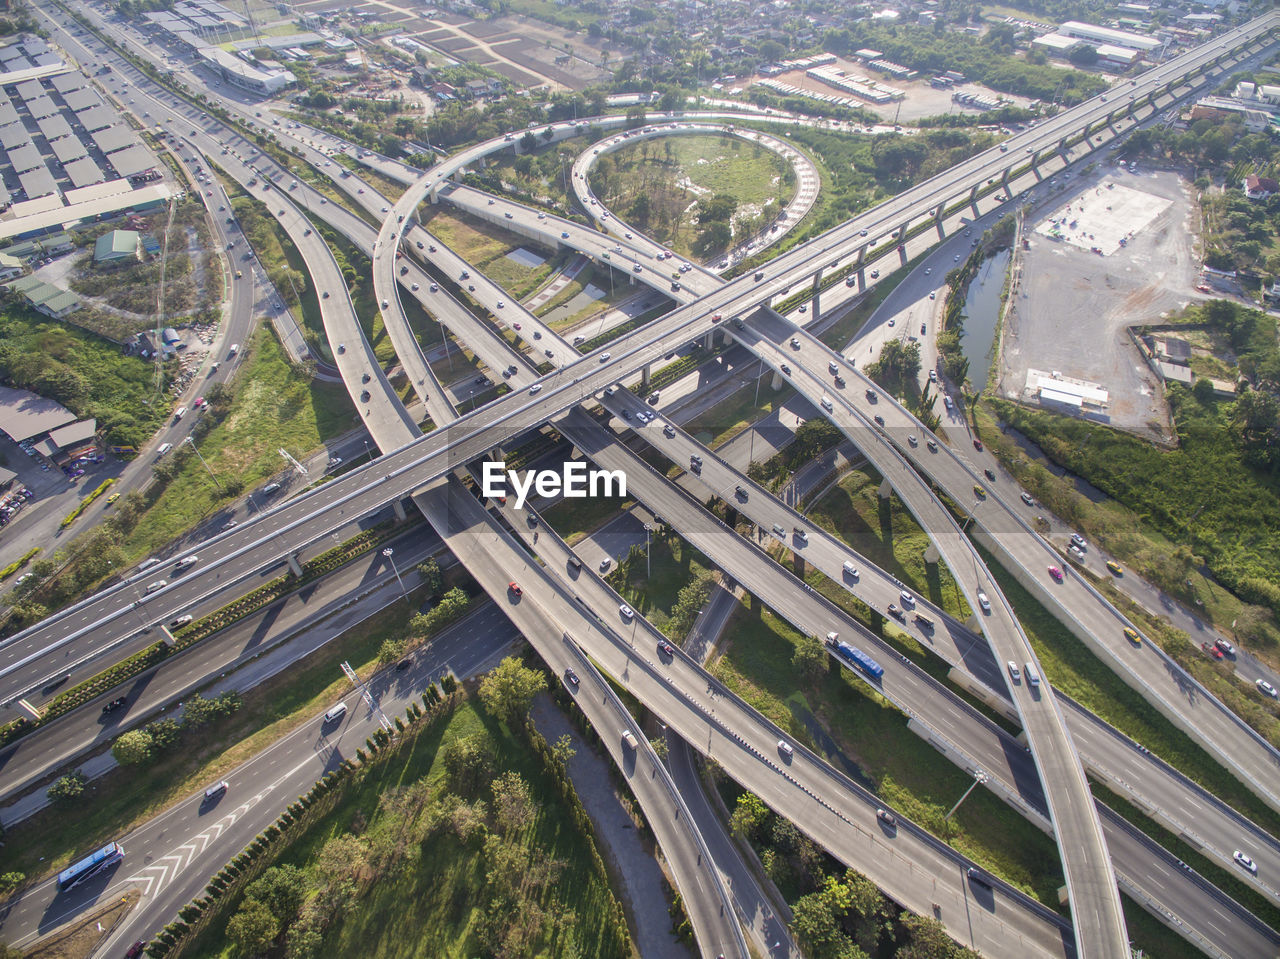 HIGH ANGLE VIEW OF ELEVATED ROAD